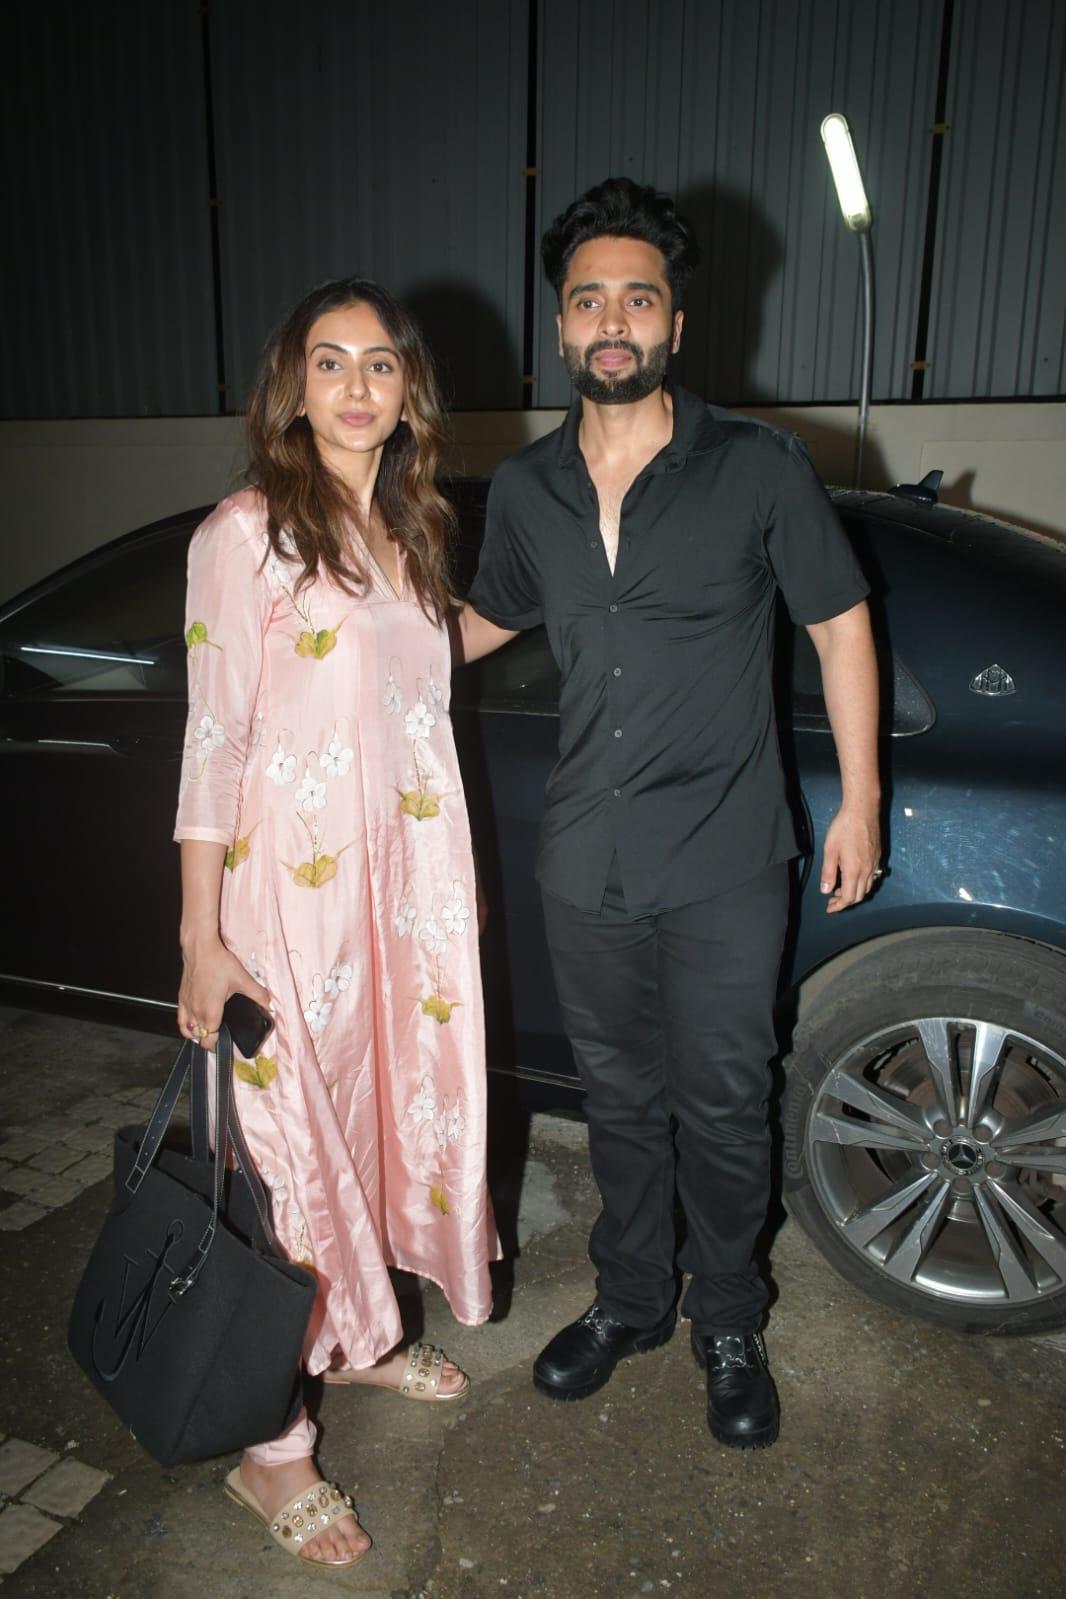 Rakul and Jacky stepped out of the car to politely pose for the paparazzi who were all too delighted to see them!